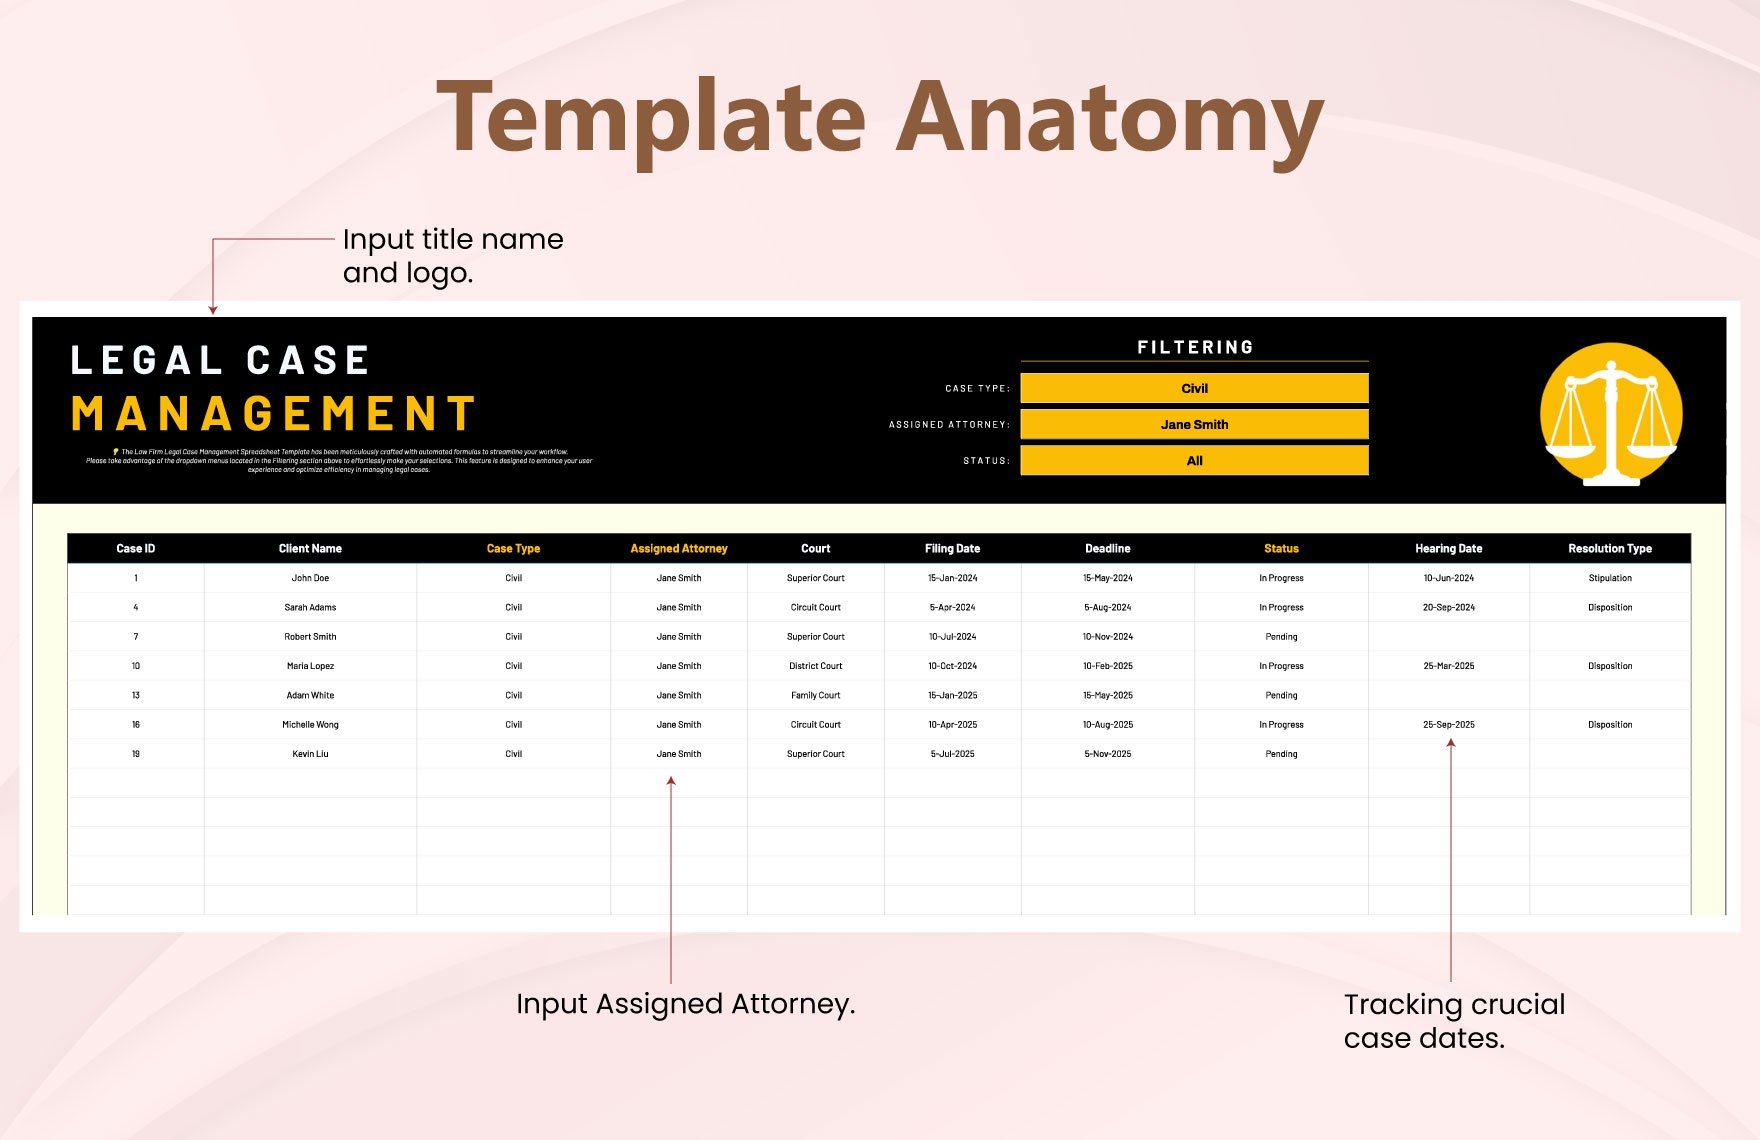 Law Firm Legal Case Management Spreadsheet Template